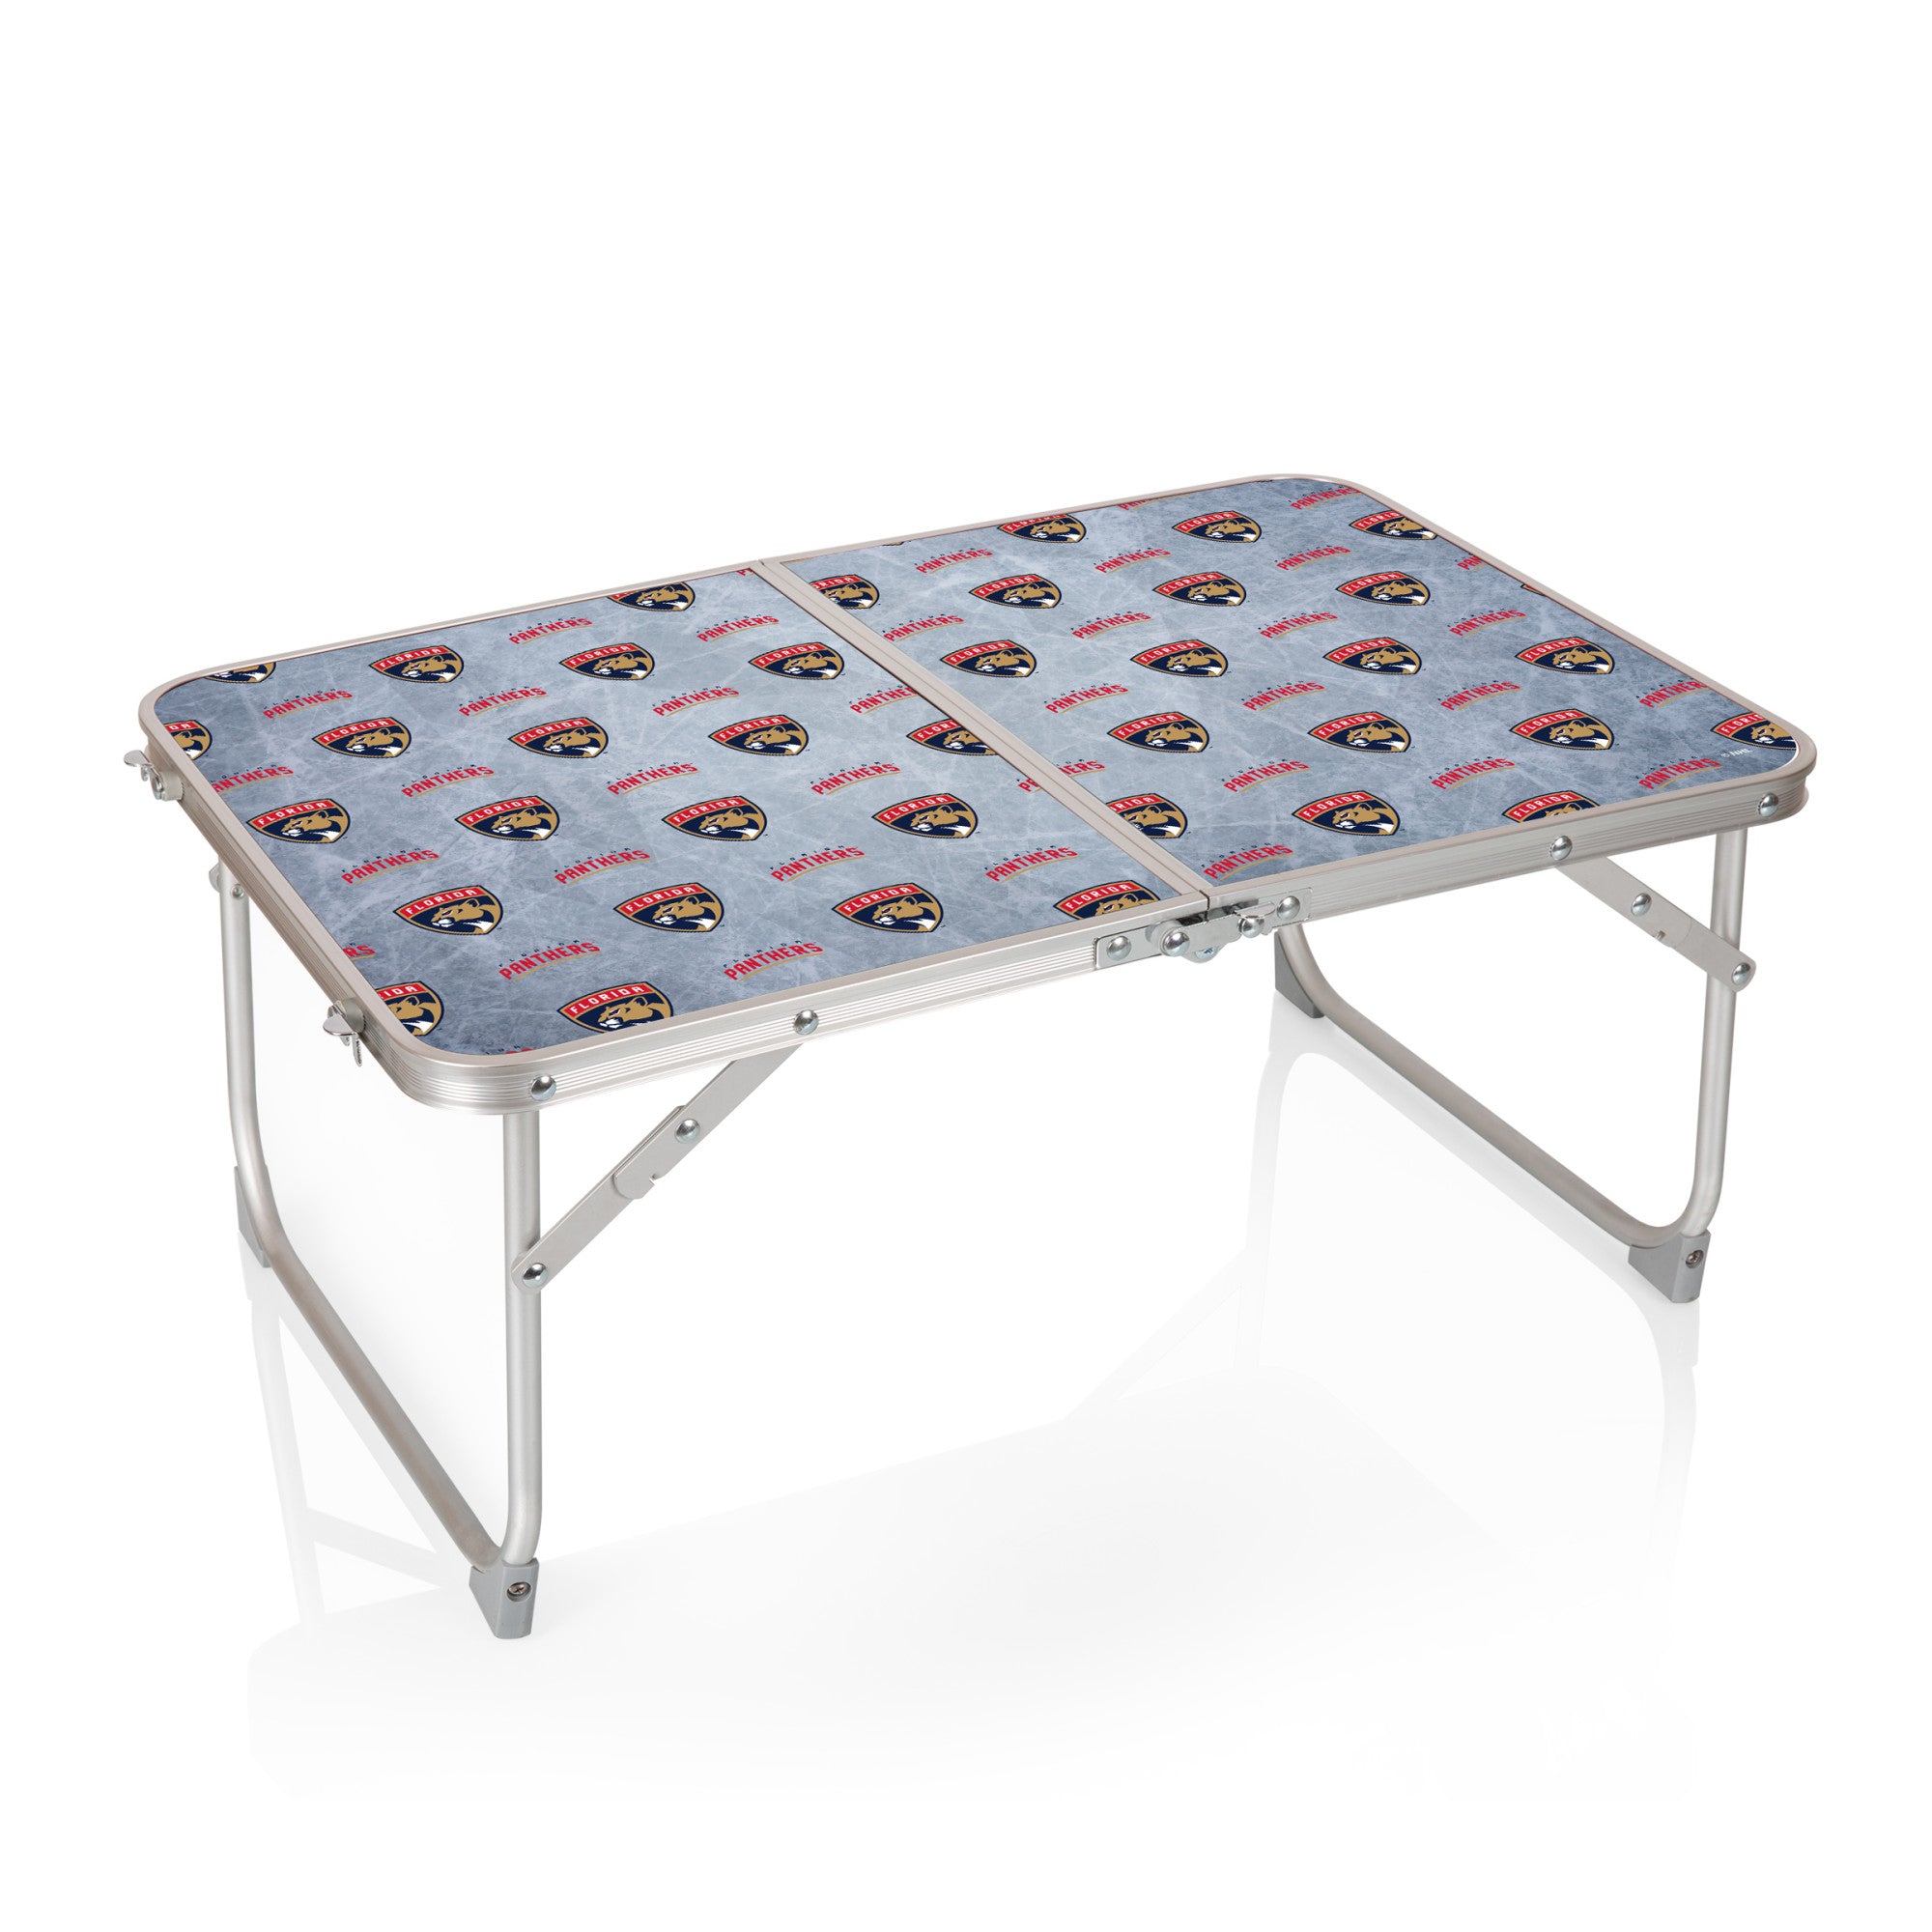 Florida Panthers - Concert Table Mini Portable Table